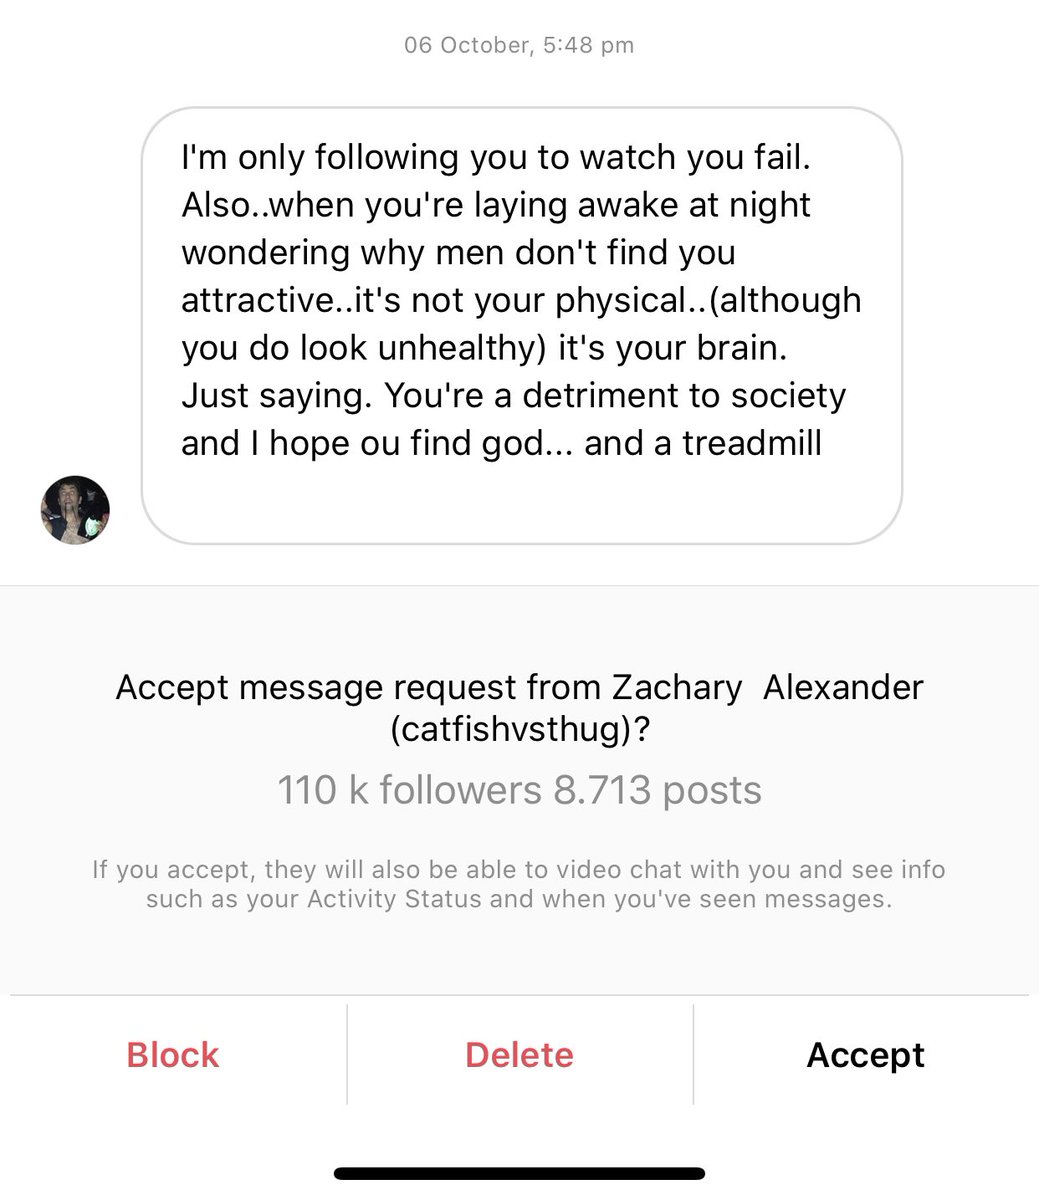 Most people who send hate DMs have the shame to do it anonymously. This pro BMXer has 110k followers. And he’s so confident he’ll face no repercussions for harassing women online that he’ll do it publiclyHe’s probably right (that he won’t get into trouble lol nothing else)